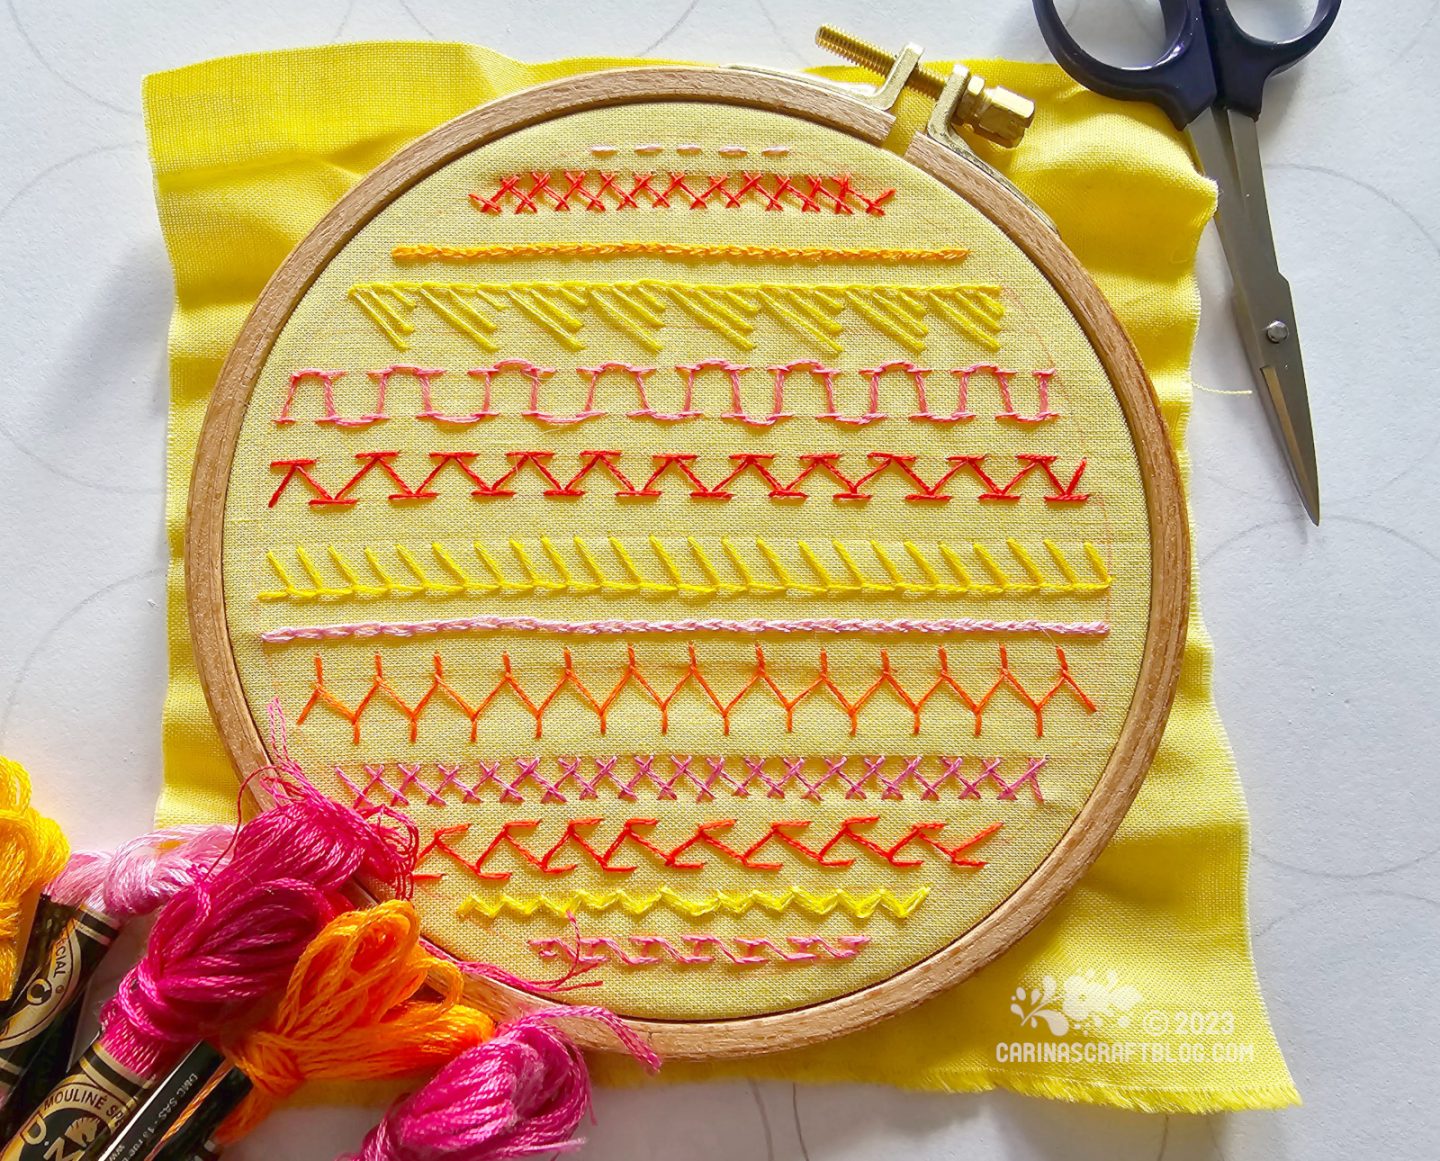 A wooden embroidery hoop with a yellow square of fabric framed in it. On the fabric are stitched rows of different stitches in yellow, orange and pink colours.